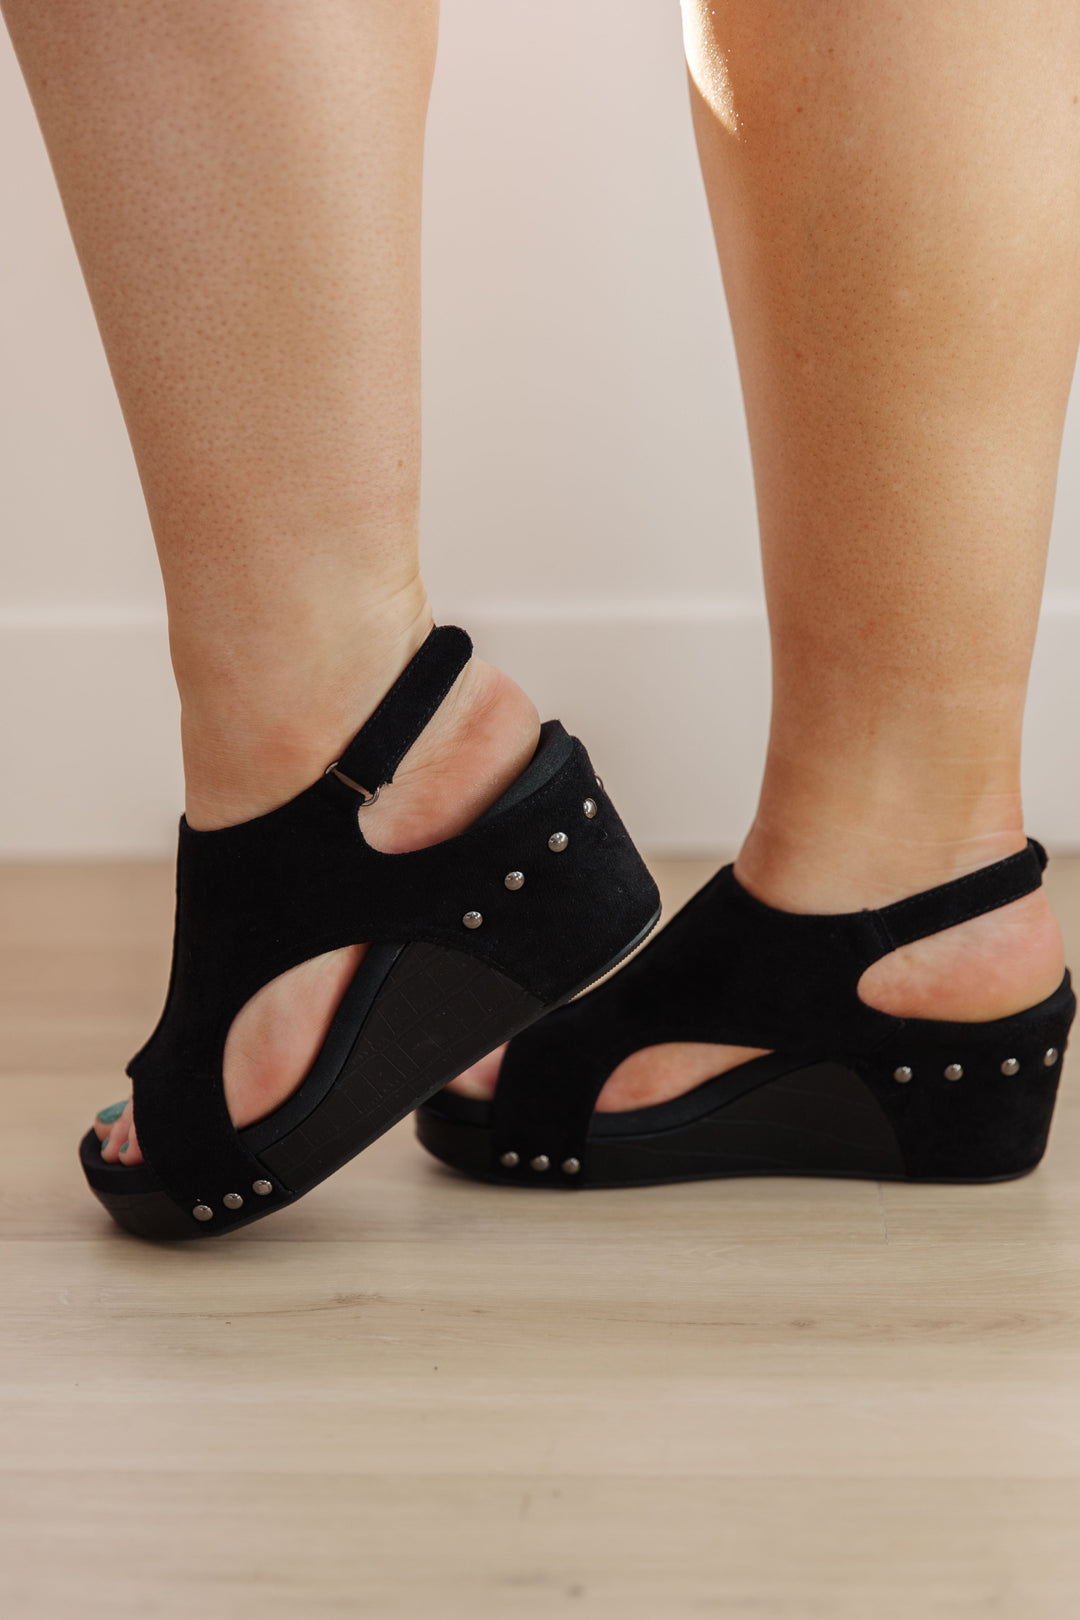 Walk This Way Wedge Sandals in Black Suede-Shoes-Inspired by Justeen-Women's Clothing Boutique in Chicago, Illinois